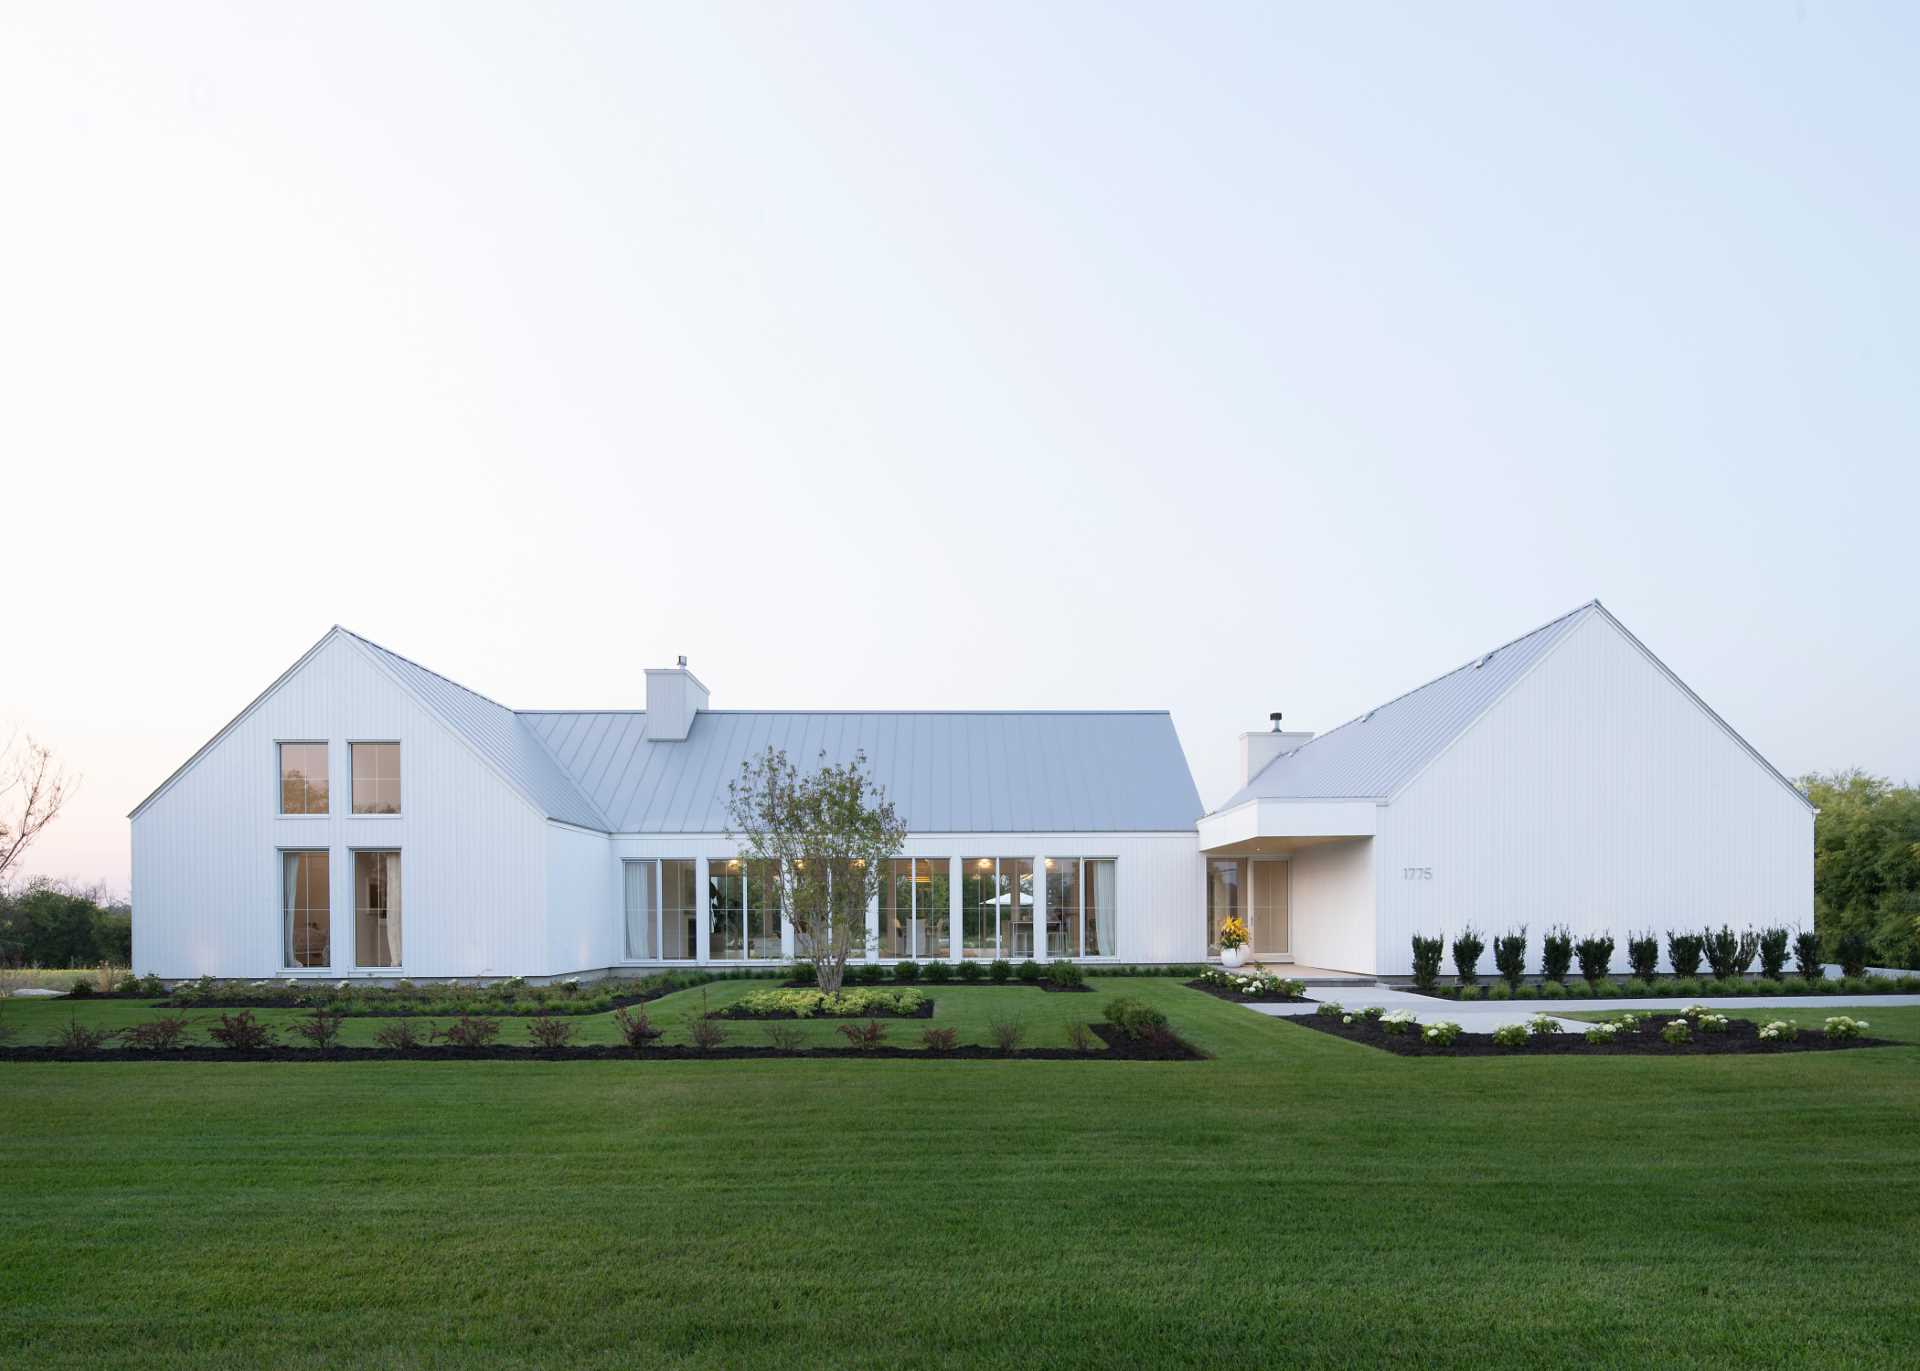 A contemporary house with a white exterior and landscaped yard.